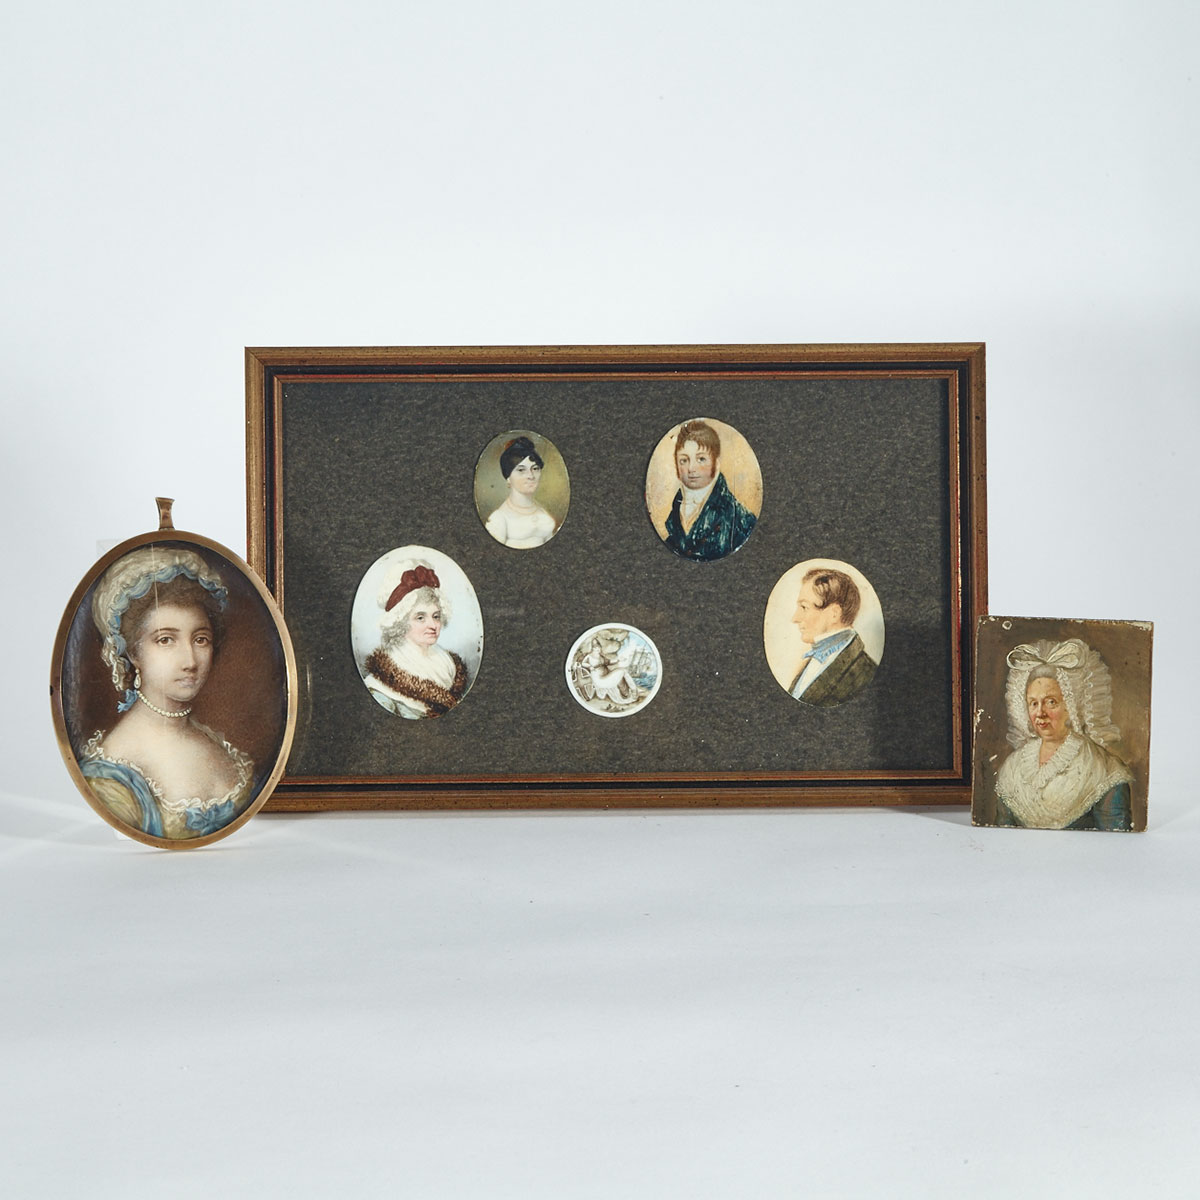 Miscellaneous Group of Portrait Miniatures, 18th and 19th centuries